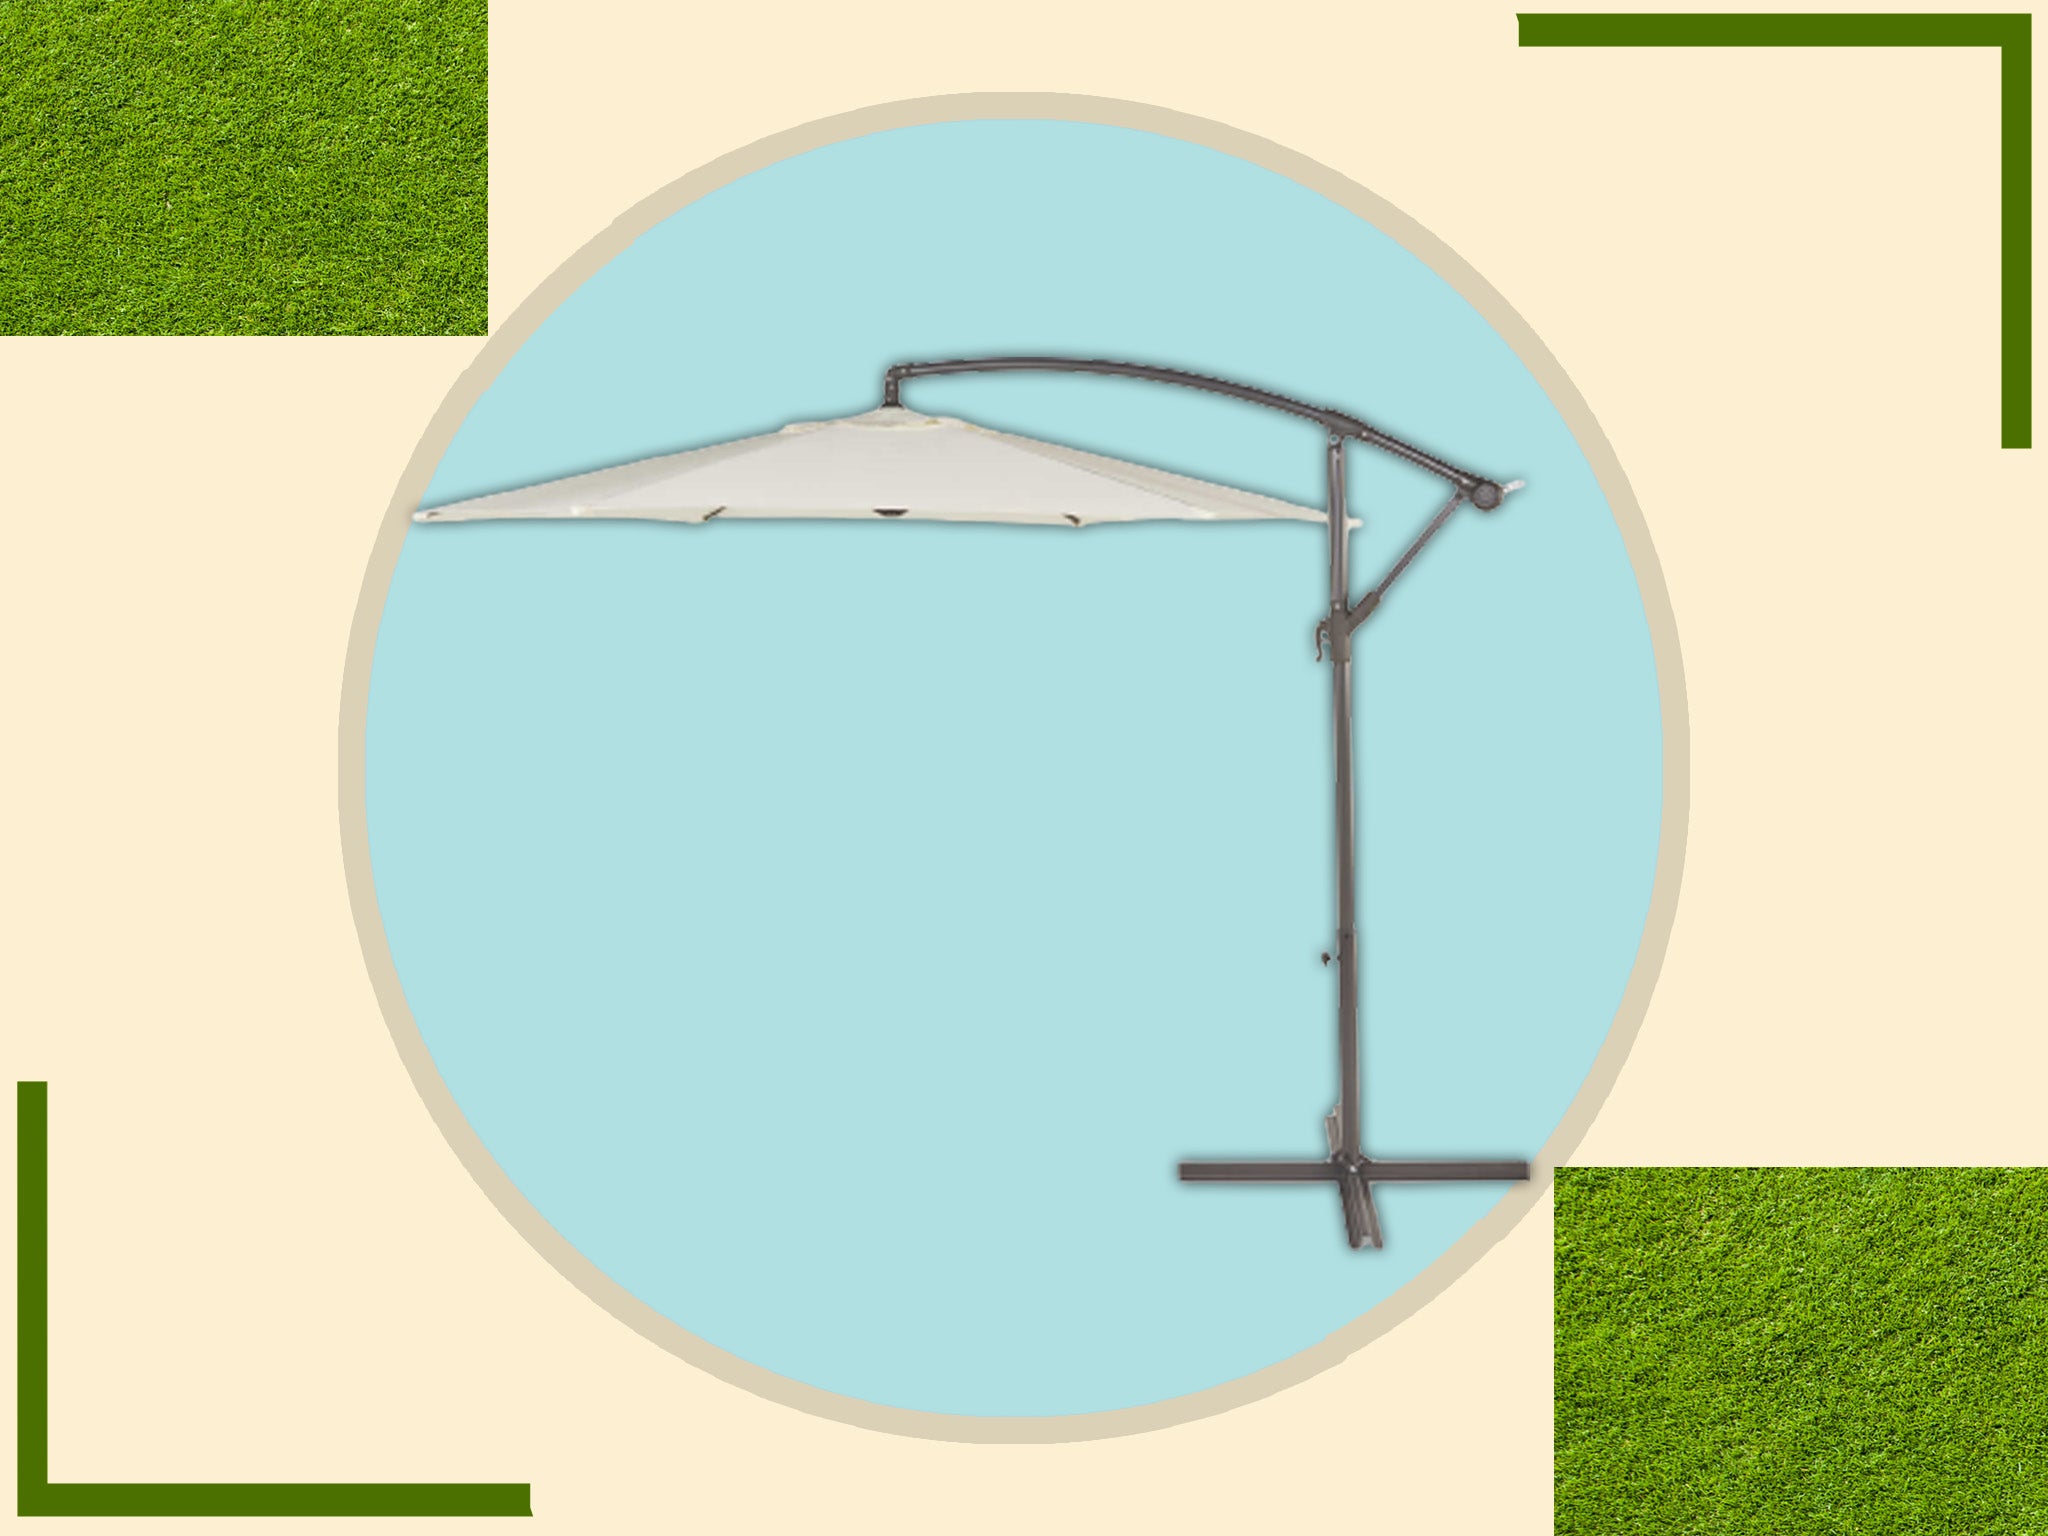 With some parasols costing upwards of £200, snap up this bargain fast